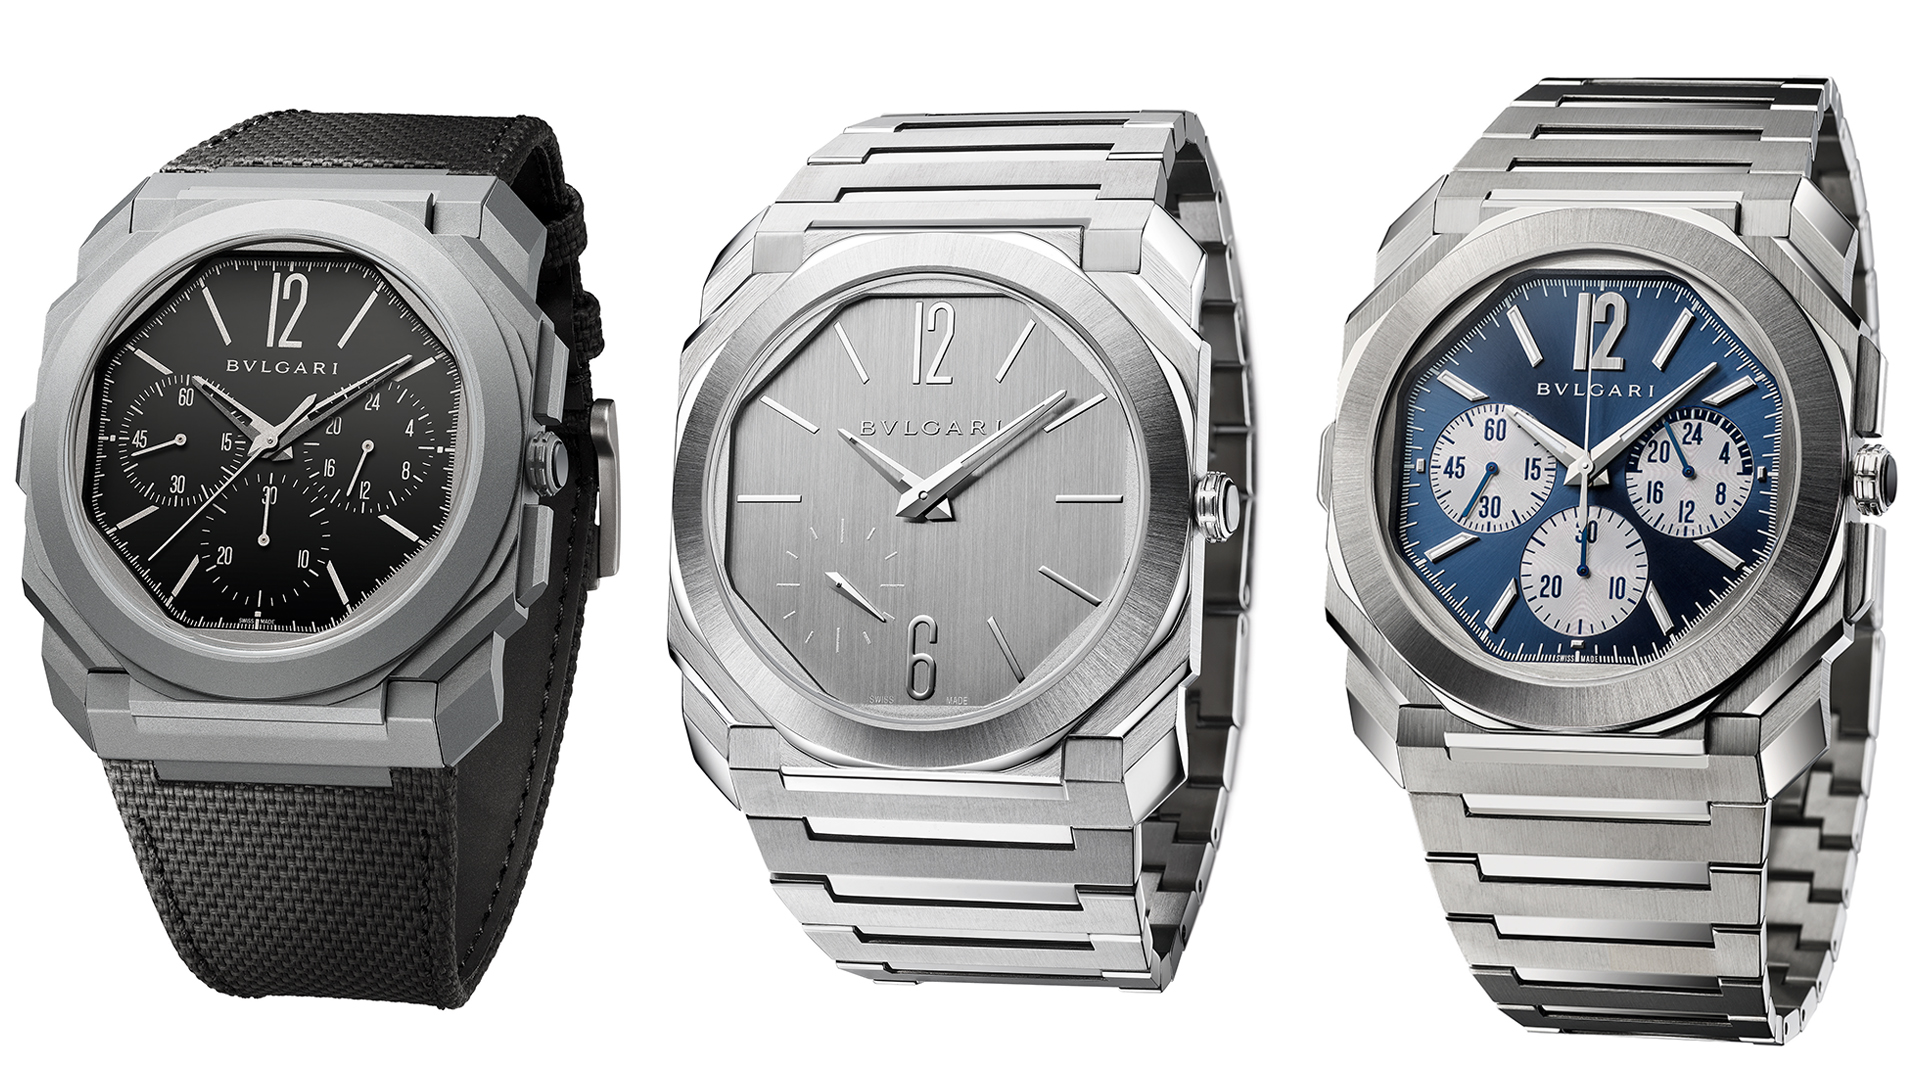 Bulgari Adds Three New Models To Octo Finissimo Watch Line | aBlogtoWatch